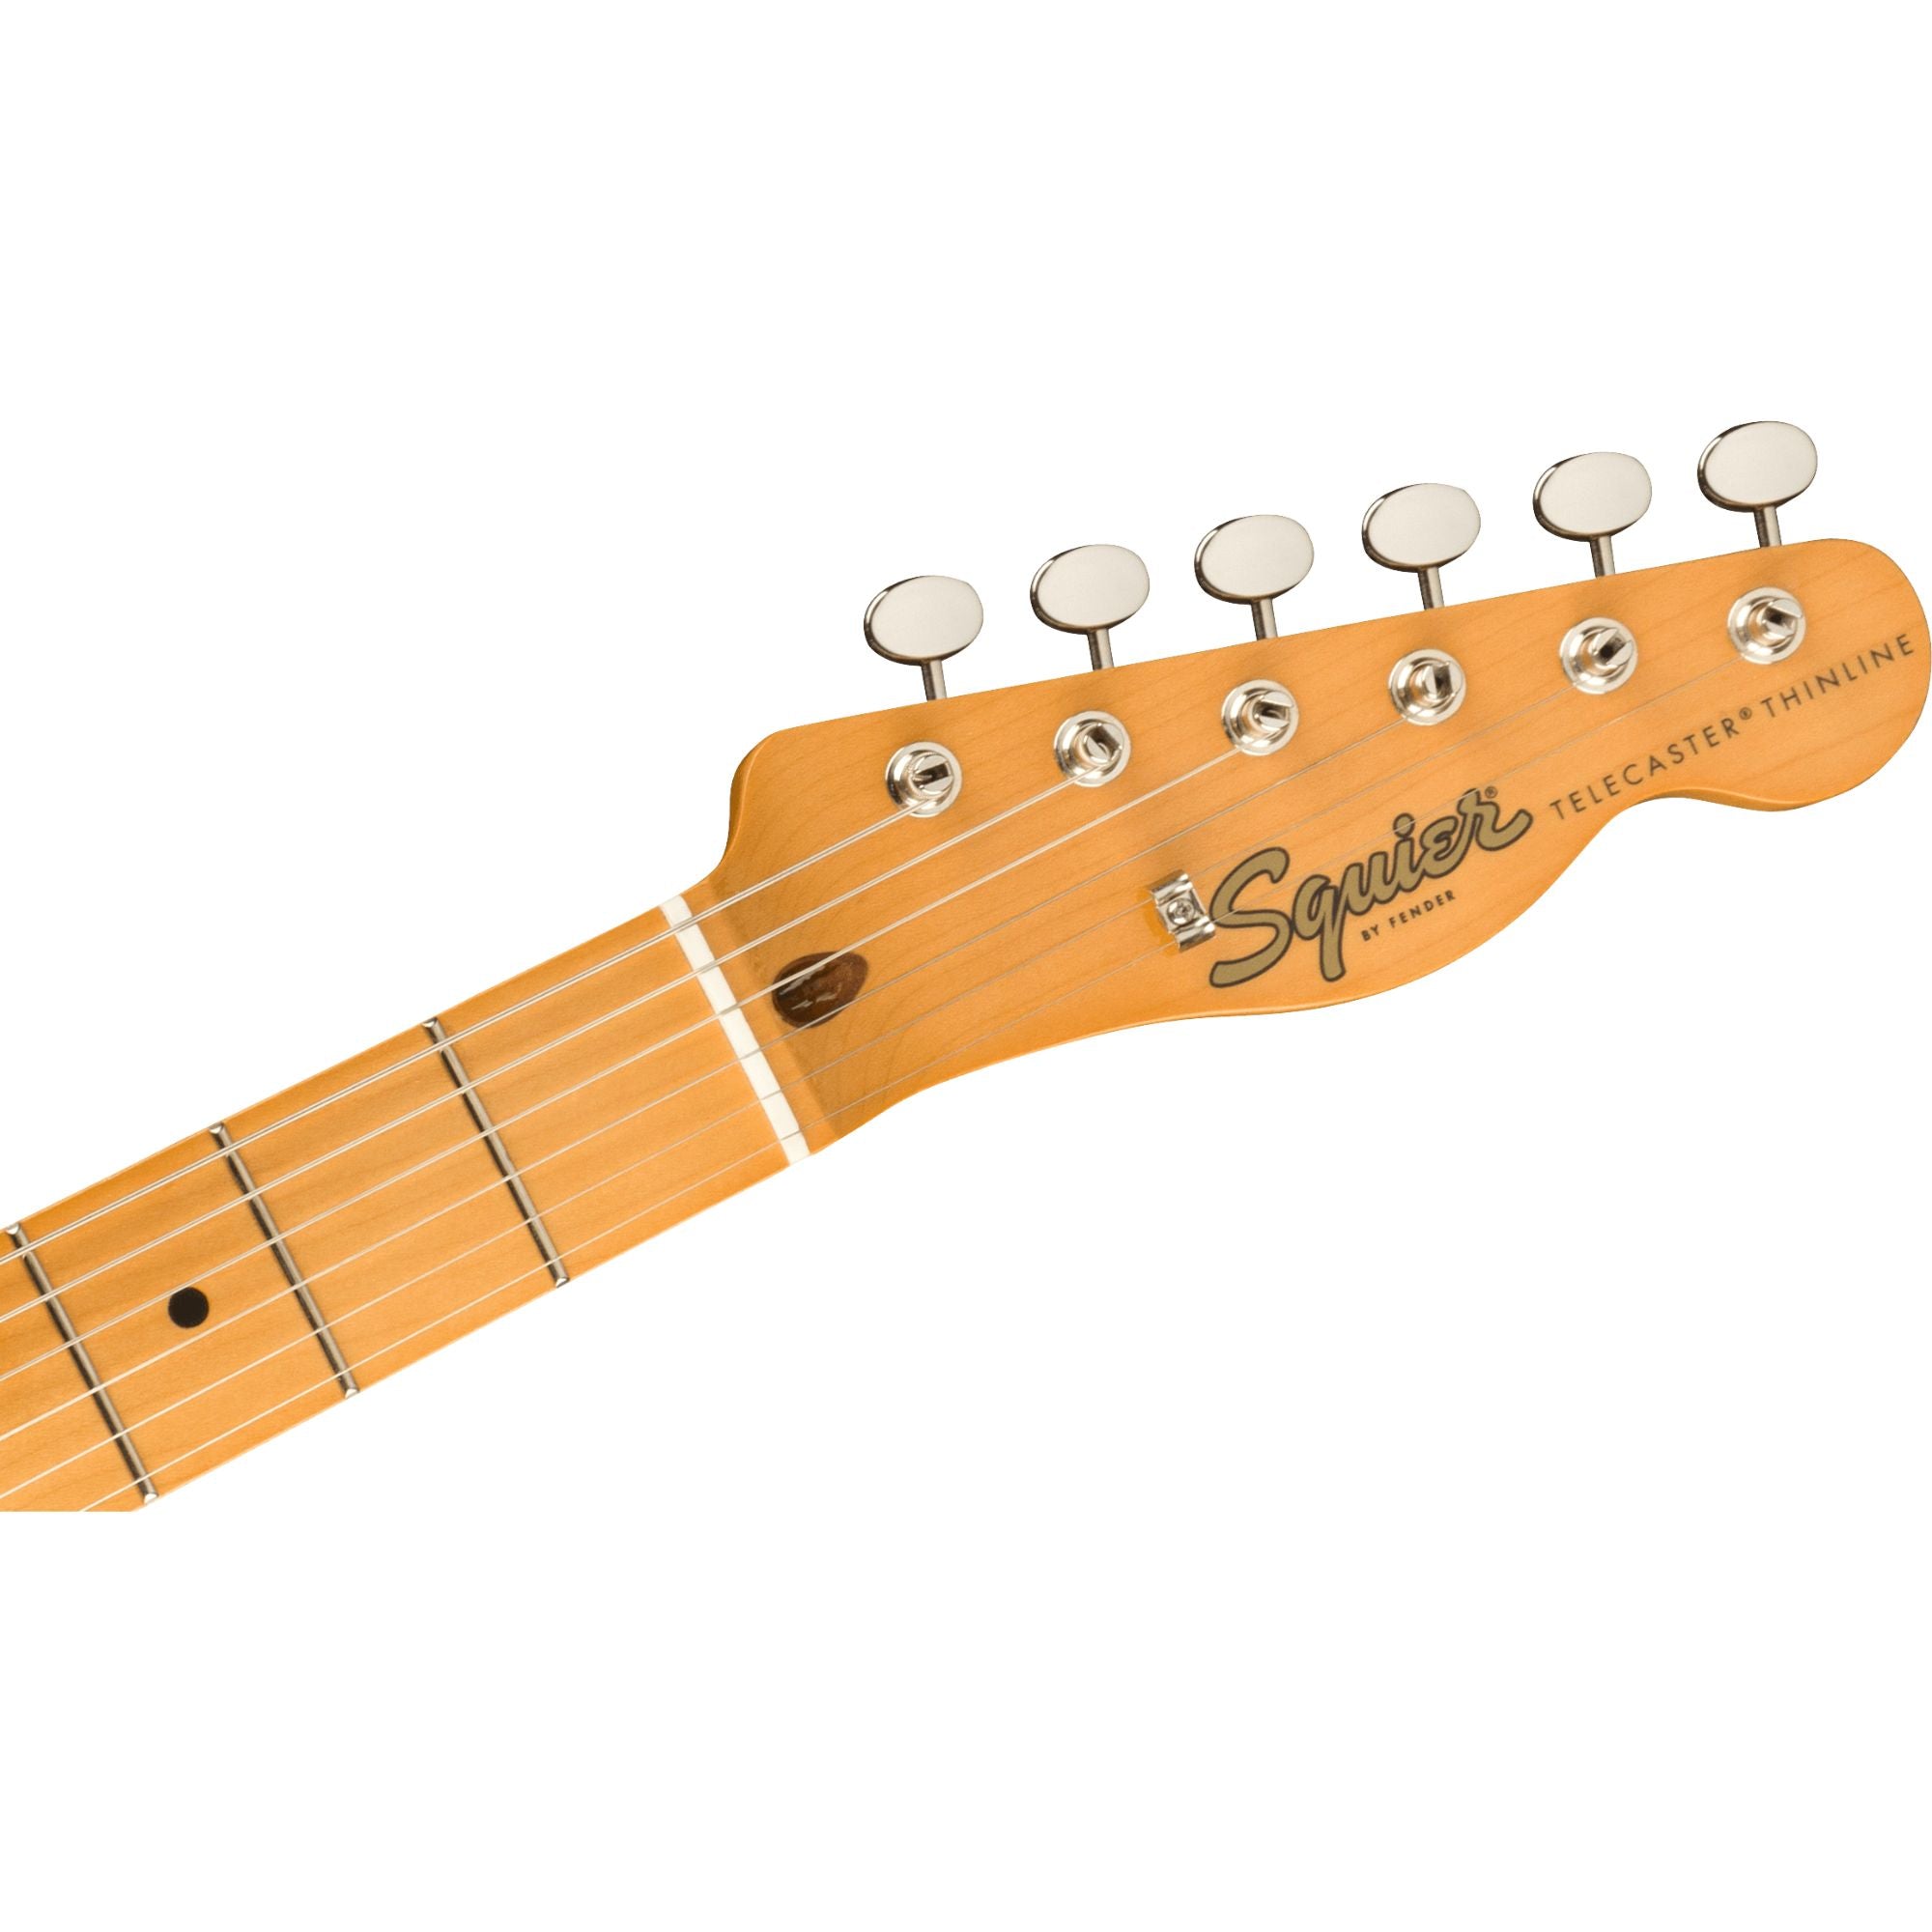 Squier Classic Vibe '60s Telecaster Thinline, Natural